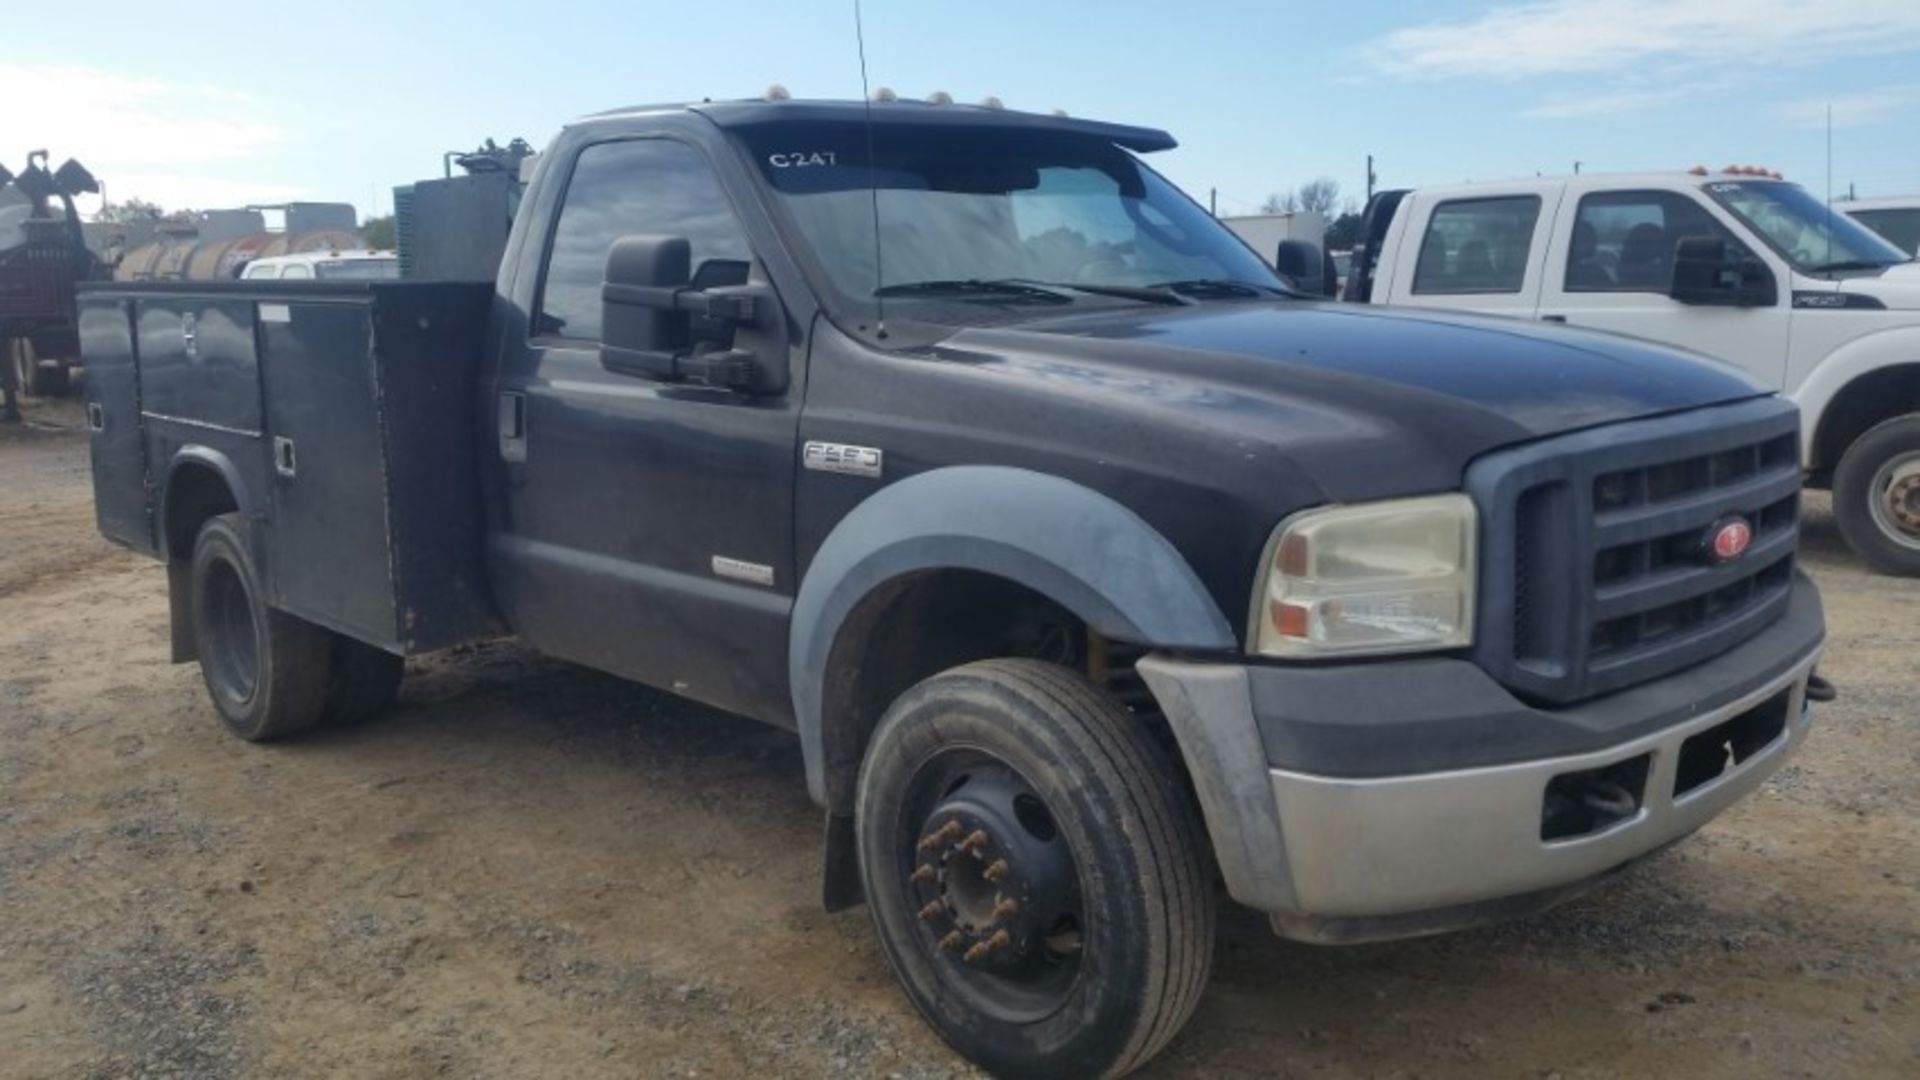 2006 Ford F-550 Service Trucn VIN: 1FDAF56P26ED53044 Odometer States: 27043 - Image 2 of 7